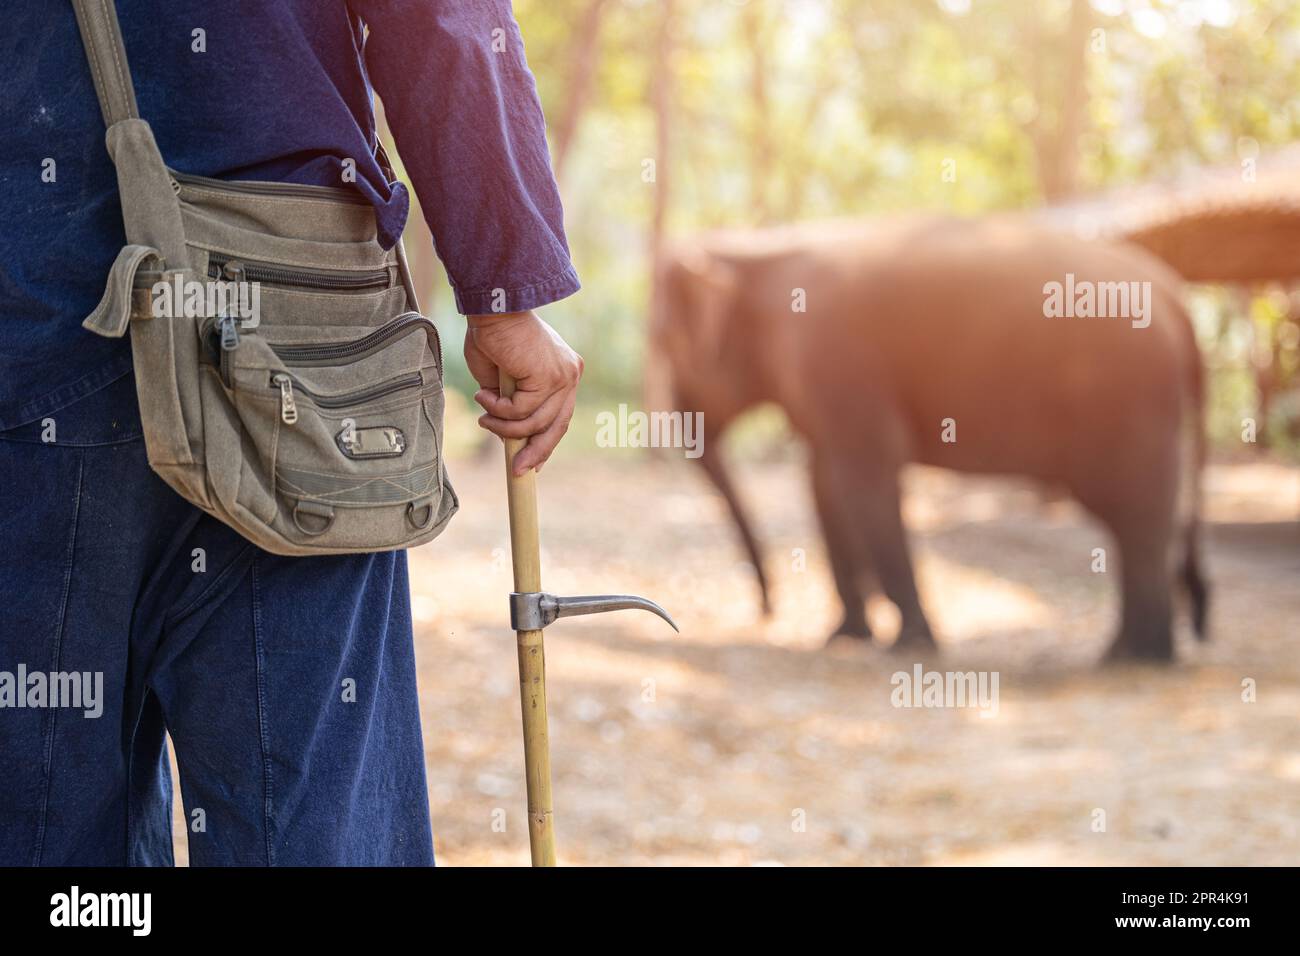 Elephant trainer or Mahout with Bull Hook Ankus for control order wild elephant keep protect from elephant hunter for tusks Stock Photo